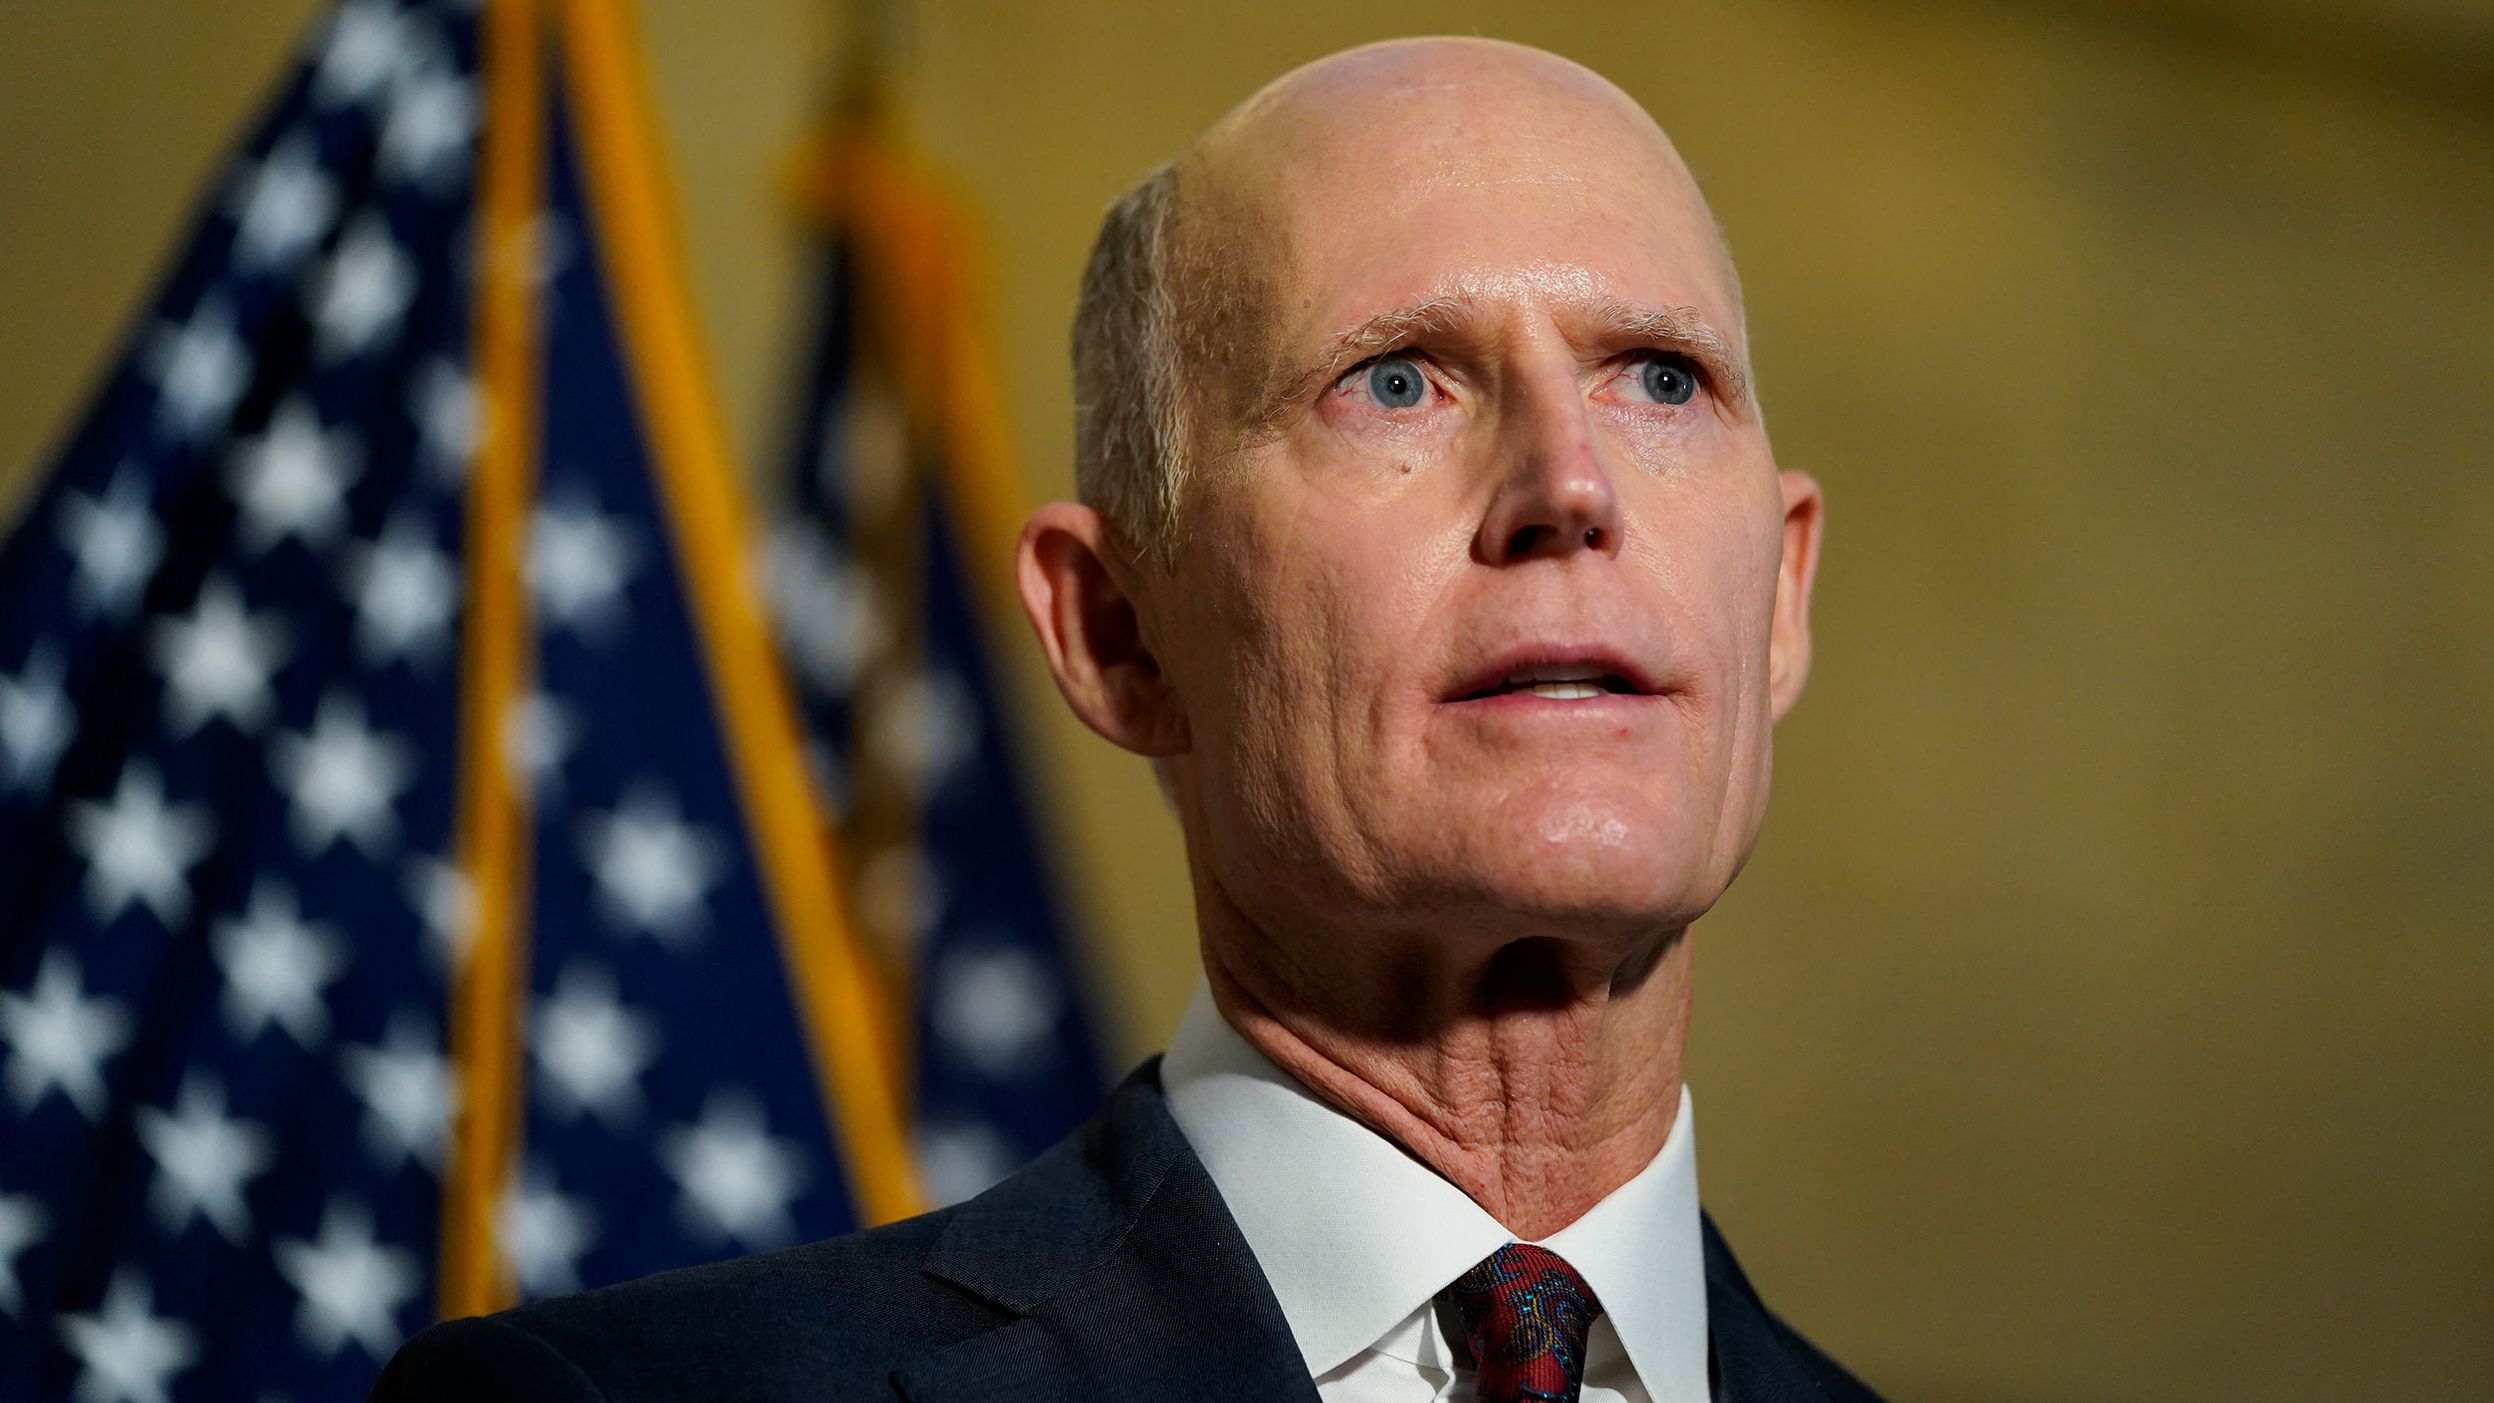 Sen. Rick Scott speaks during a Republican news conference about inflation on Capitol Hill.